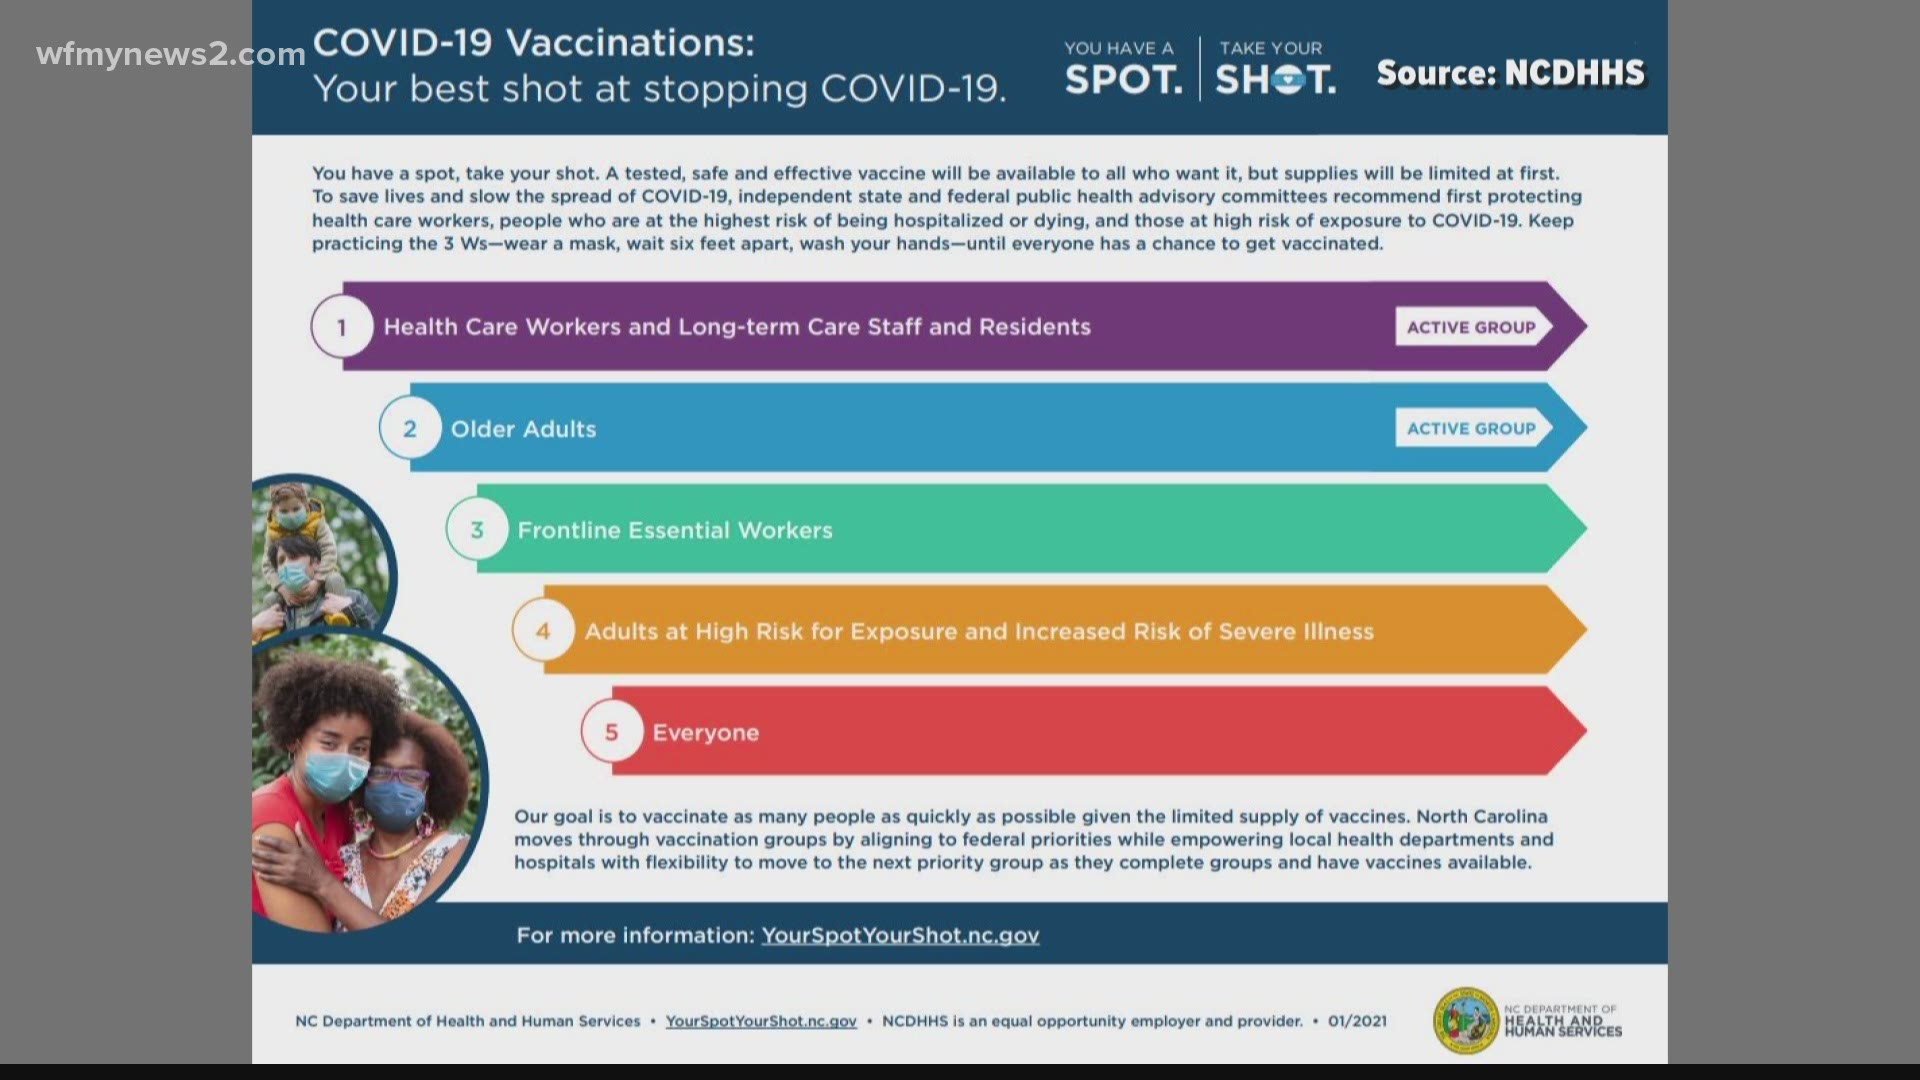 The NCDHHS has simplified the vaccine phases and sub-categories. There are now five priority groups, two of which are currently active based on county resources.